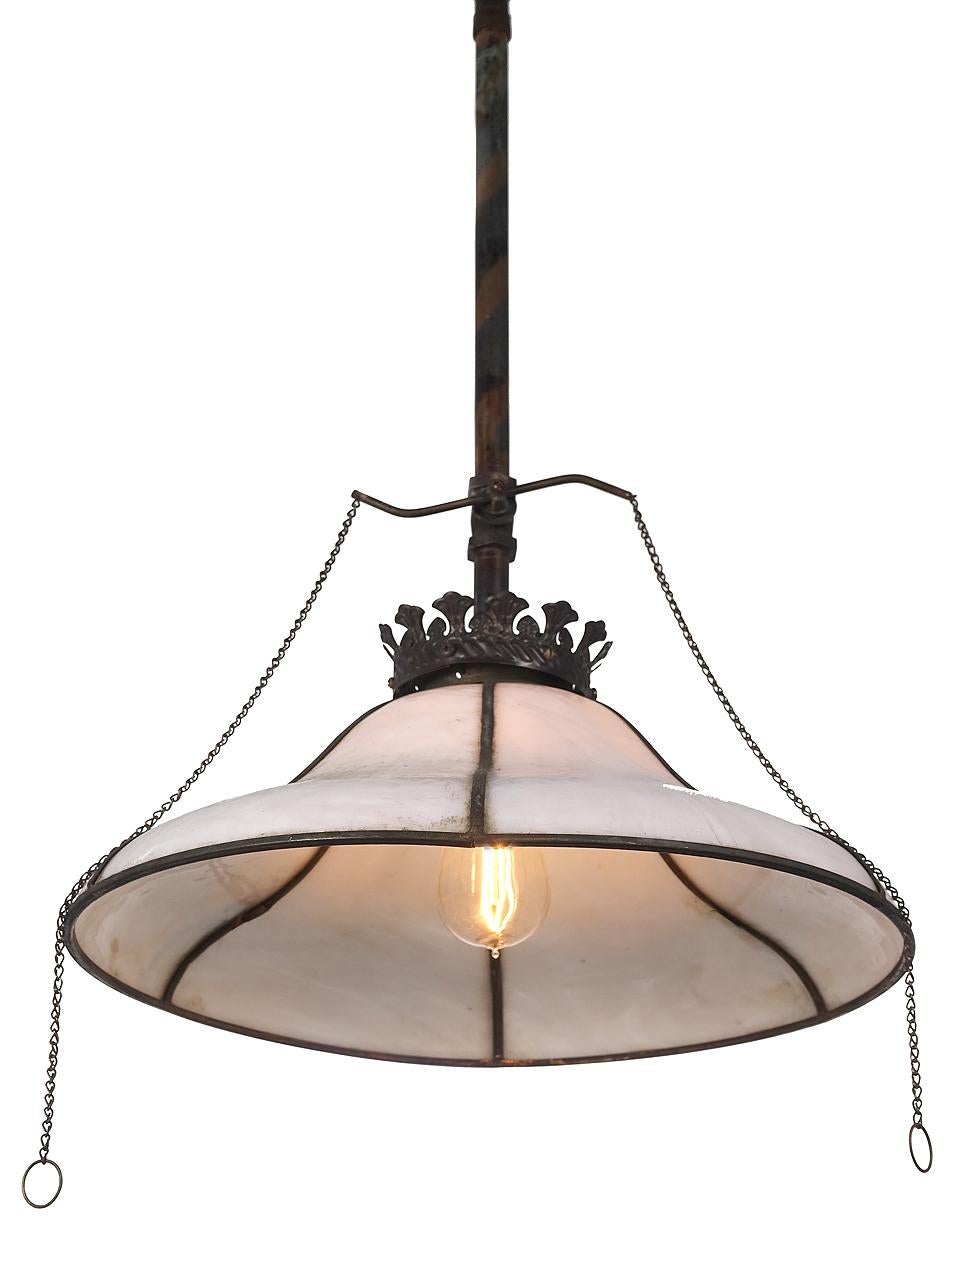 American Early Leaded Glass Gas Lamp